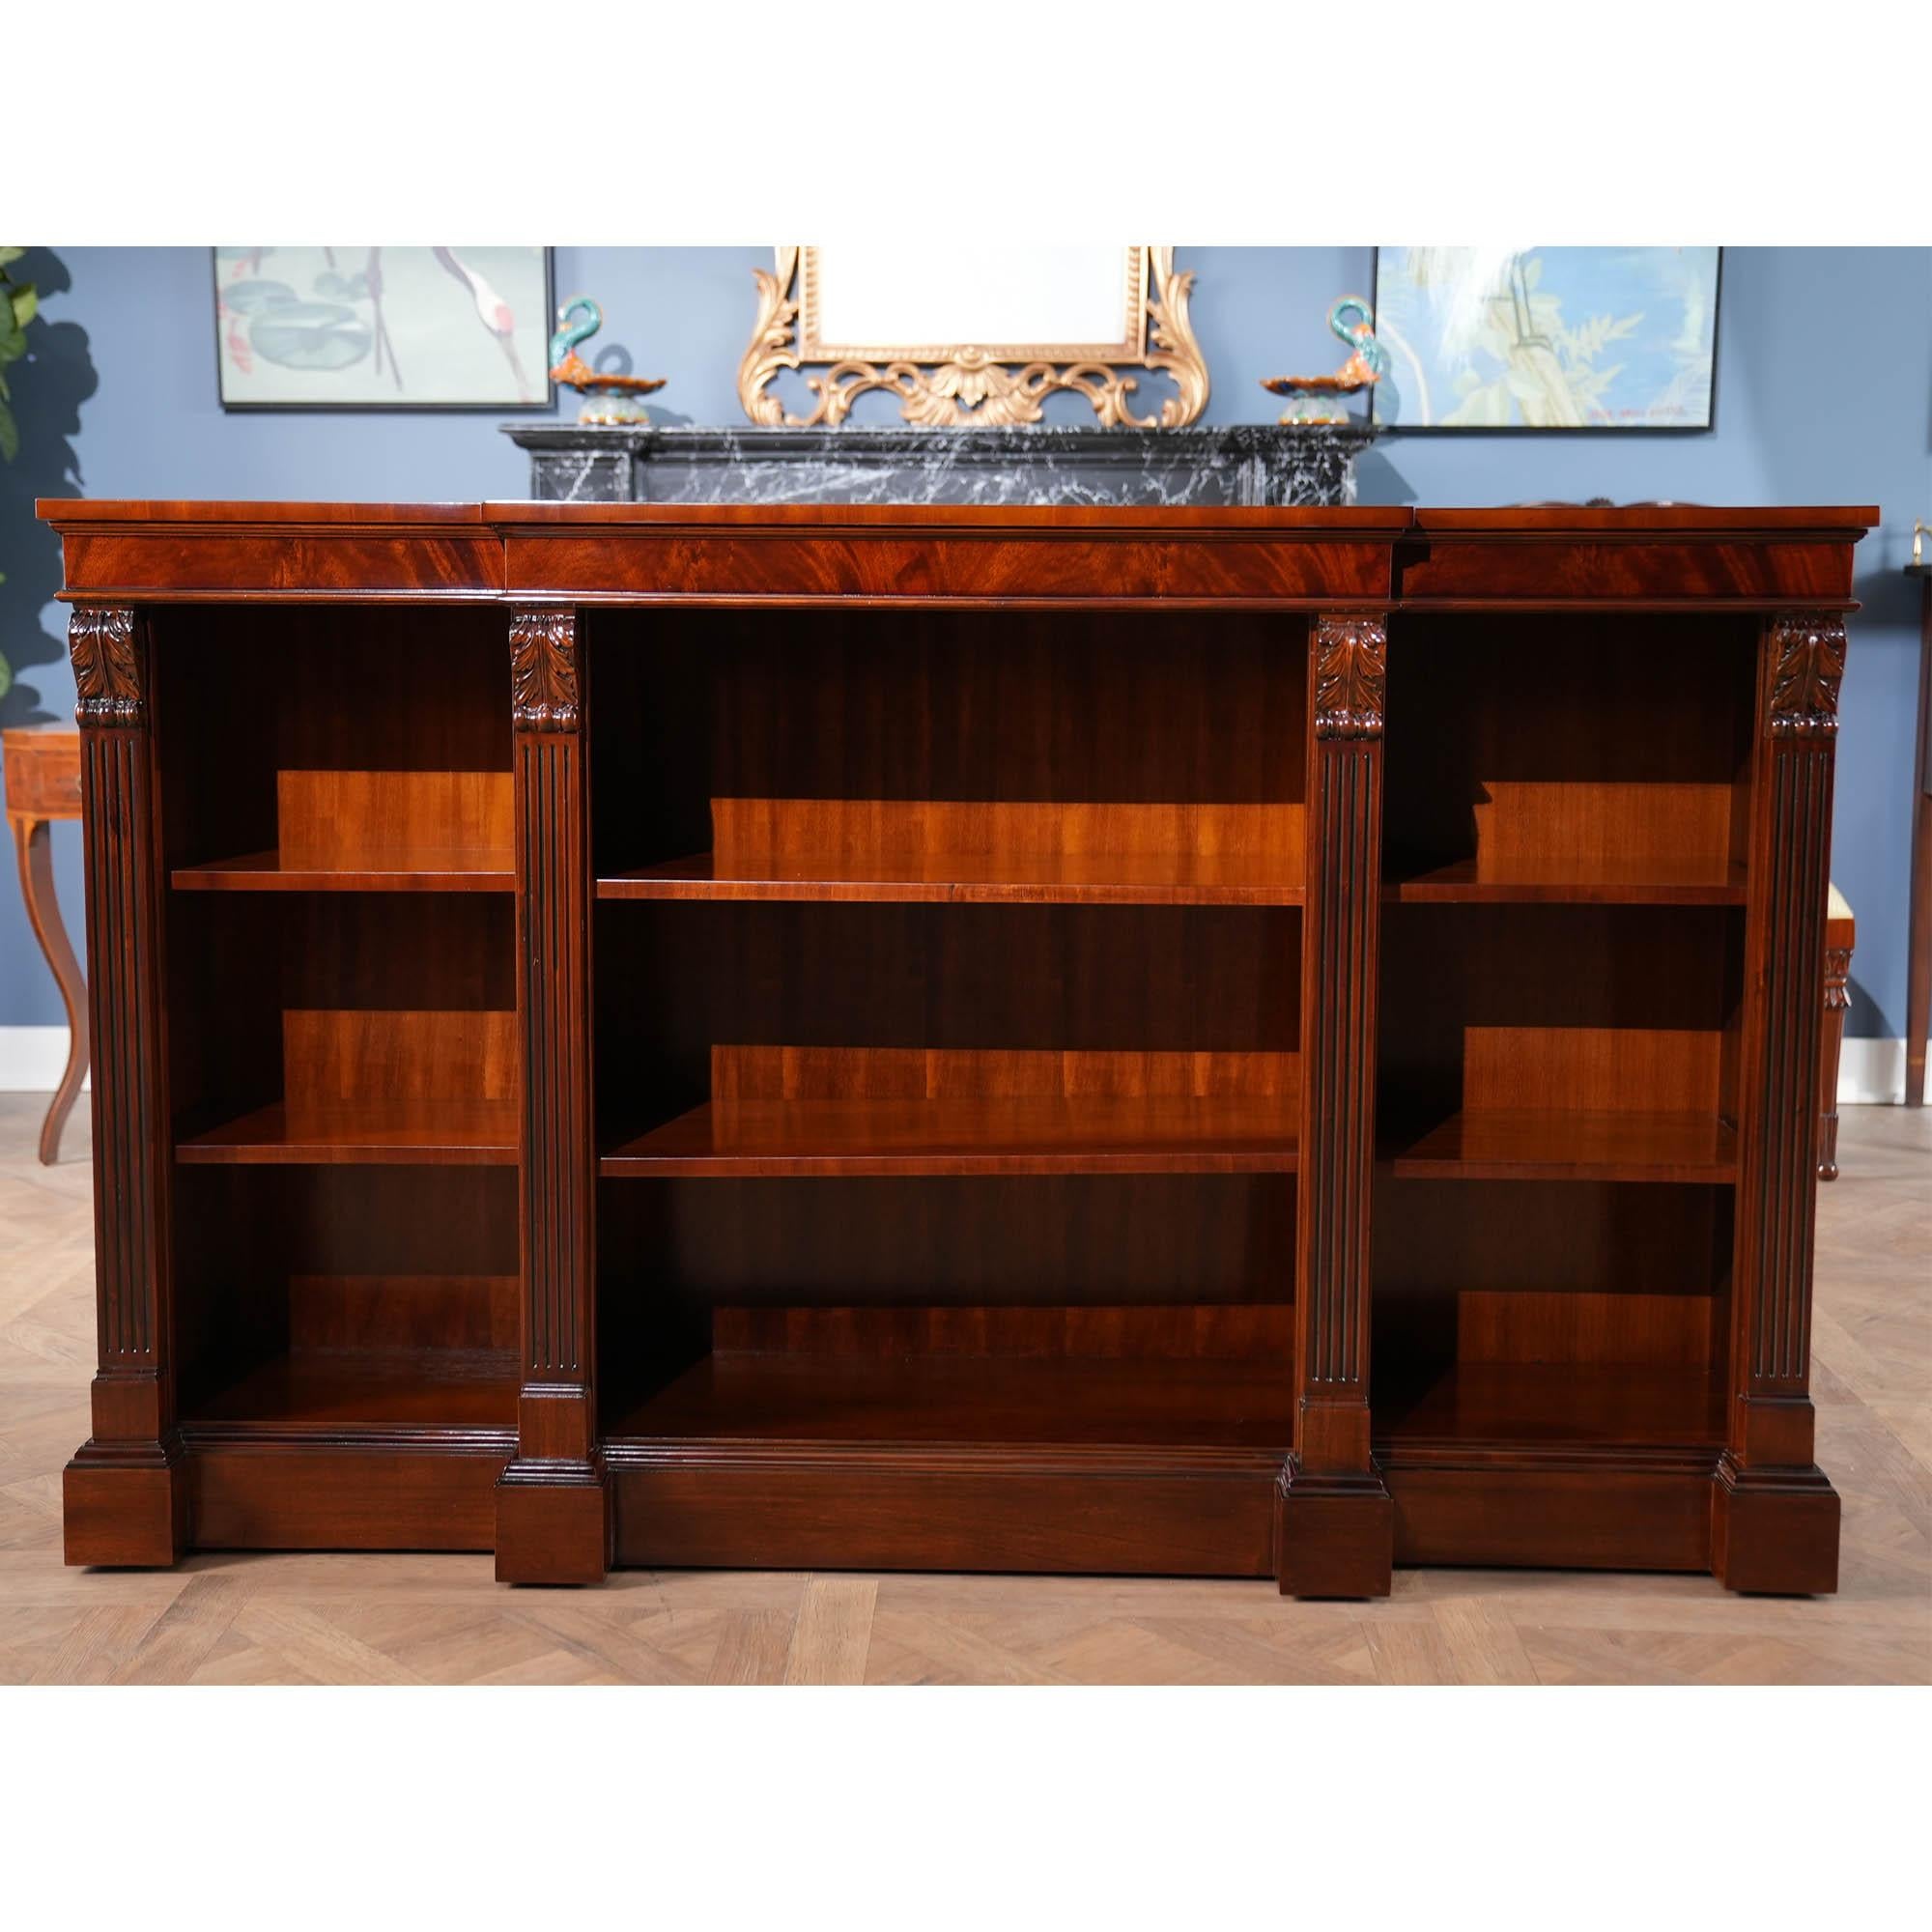 This very popular Penhurst Mahogany Bookcase from Niagara Furniture has a lot of great features. It’s overall breakfront shape separates it from other flat fronted bookcases, the figural mahogany detailed cornice is beautiful and adds a sense of